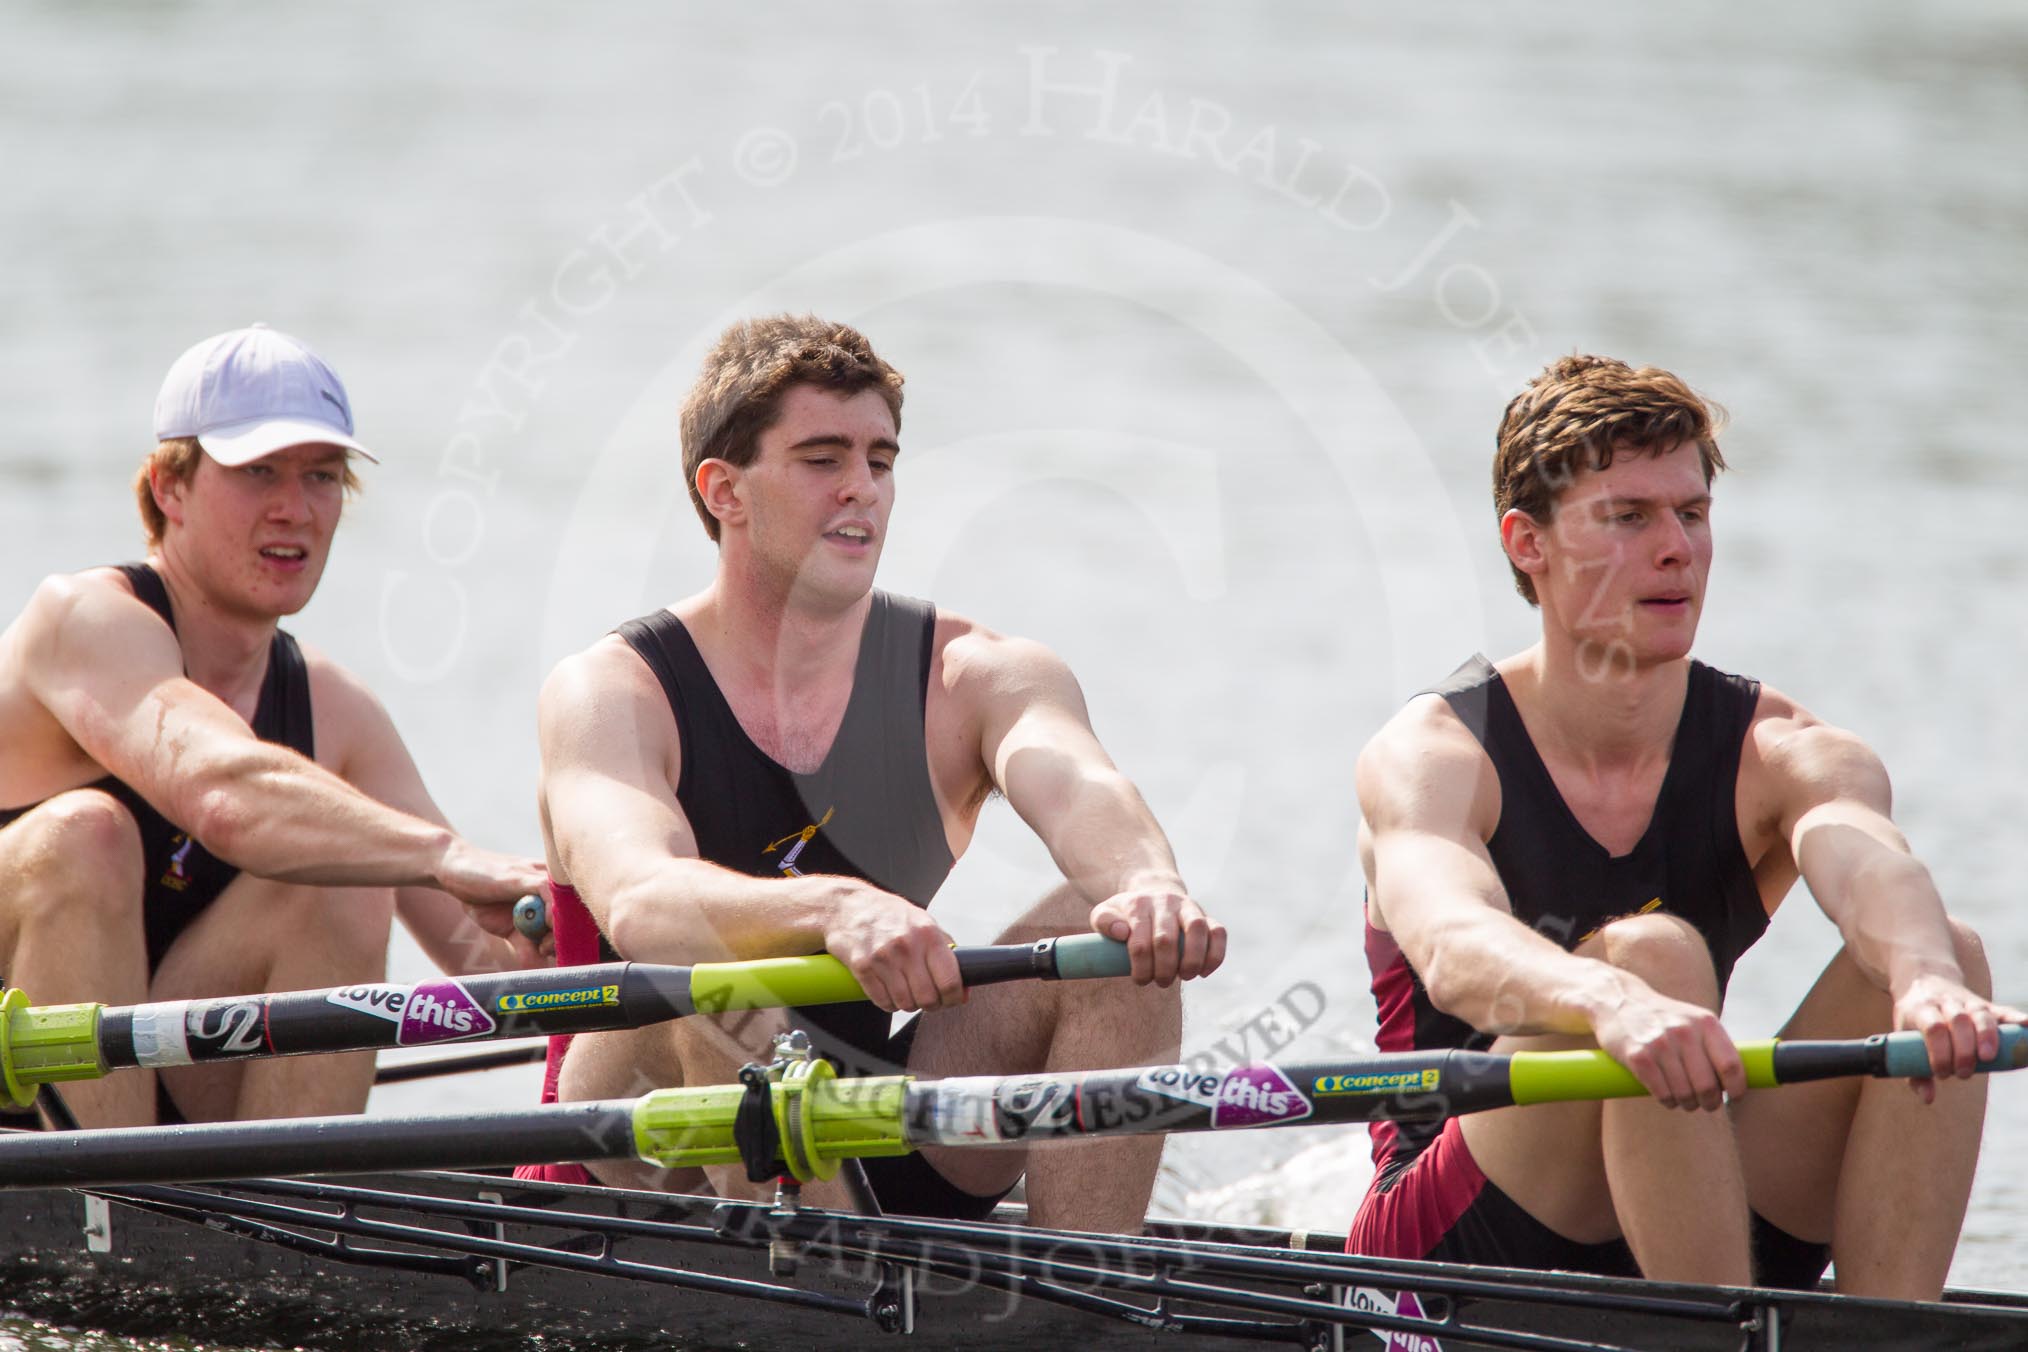 The Women's Boat Race and Henley Boat Races 2014: The Intercollegiate Men 's Race, in the Downing College boat in the 6 seat Andrew Niven, 7 Victor Van Campen, stroke Michael Whetnall..
River Thames,
Henley-on-Thames,
Buckinghamshire,
United Kingdom,
on 30 March 2014 at 14:00, image #134